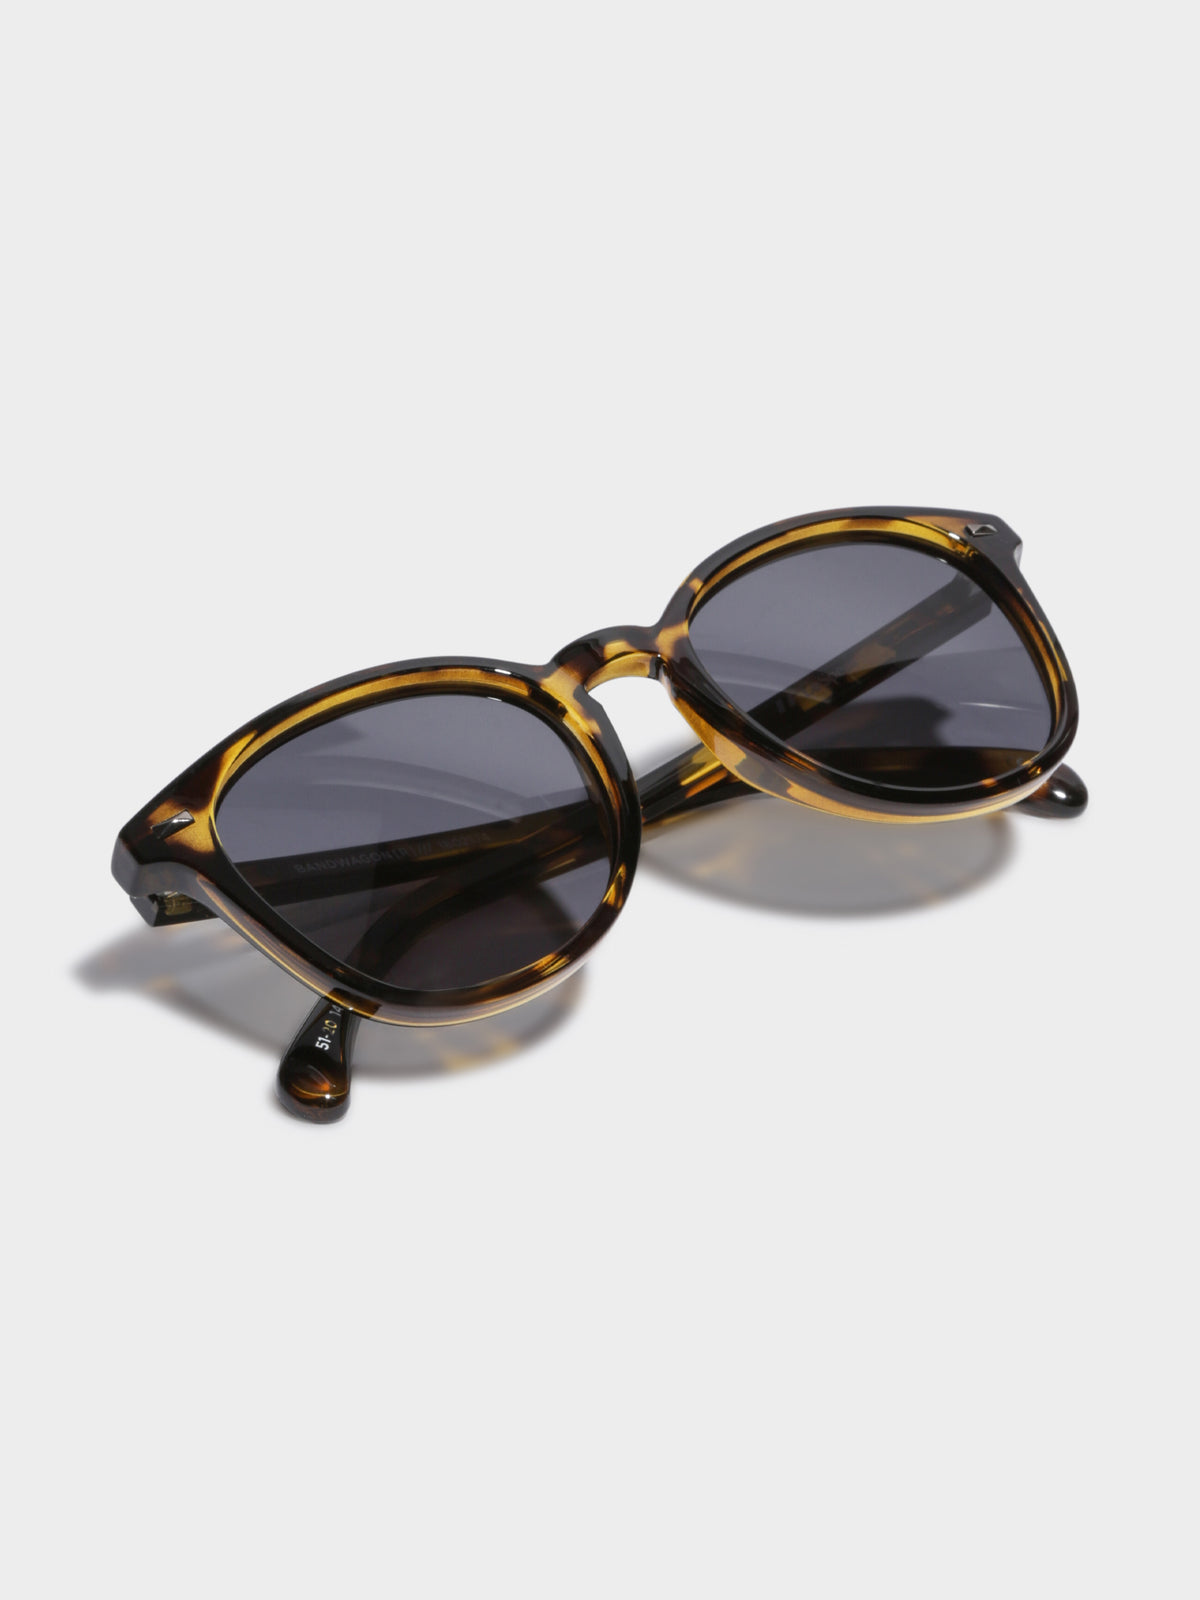 Bandwagon Sunglasses in Syrup Tort